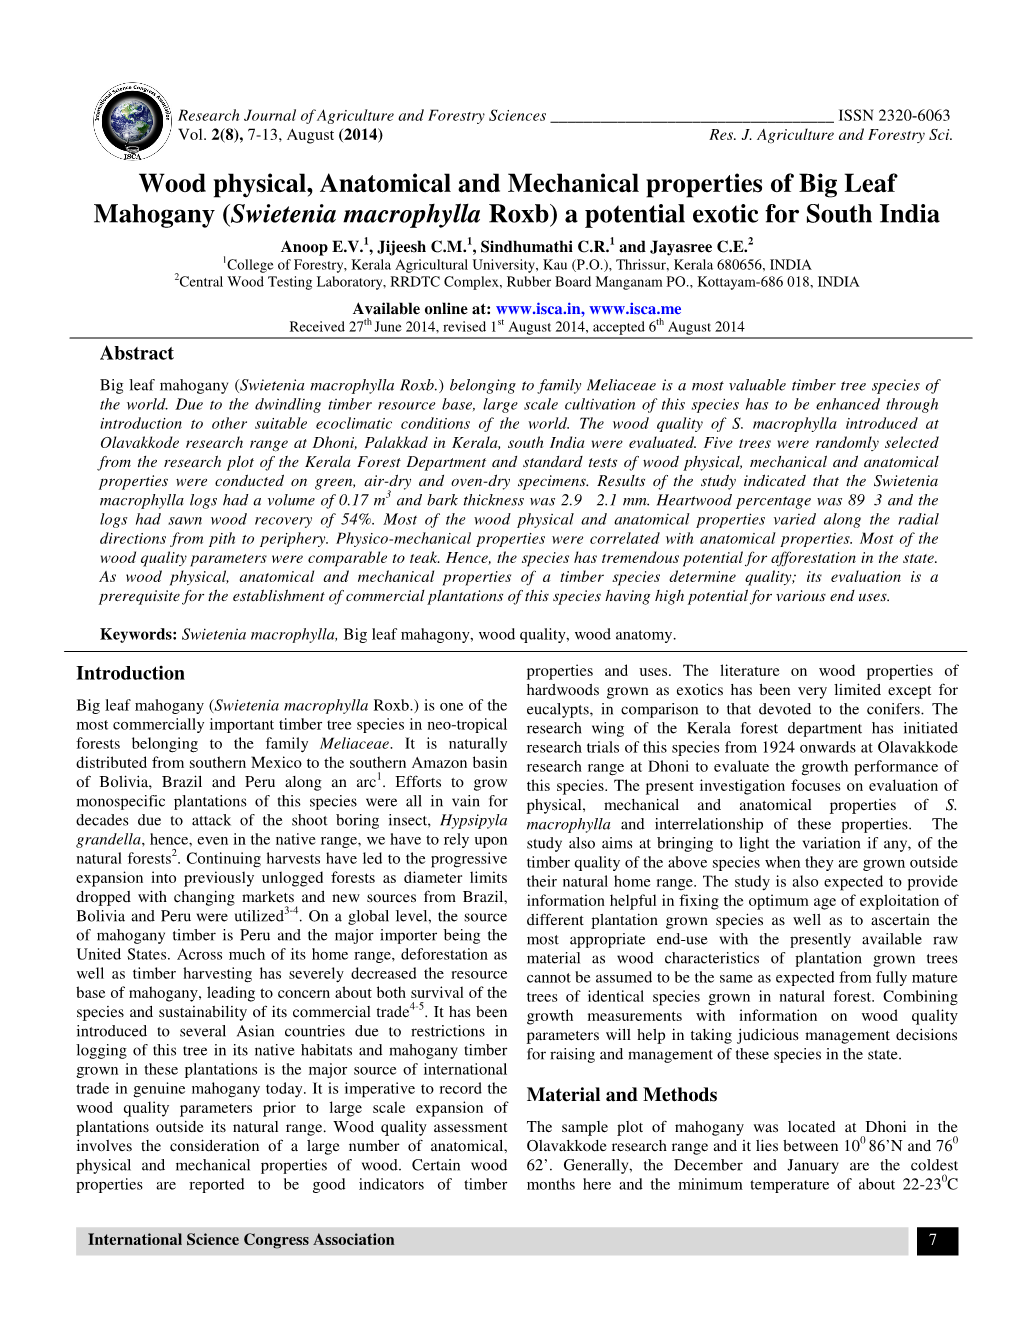 Wood Physical, Anatomical and Mechanical Properties of Big Leaf Mahogany (Swietenia Macrophylla Roxb) a Potential Exotic for South India Anoop E.V